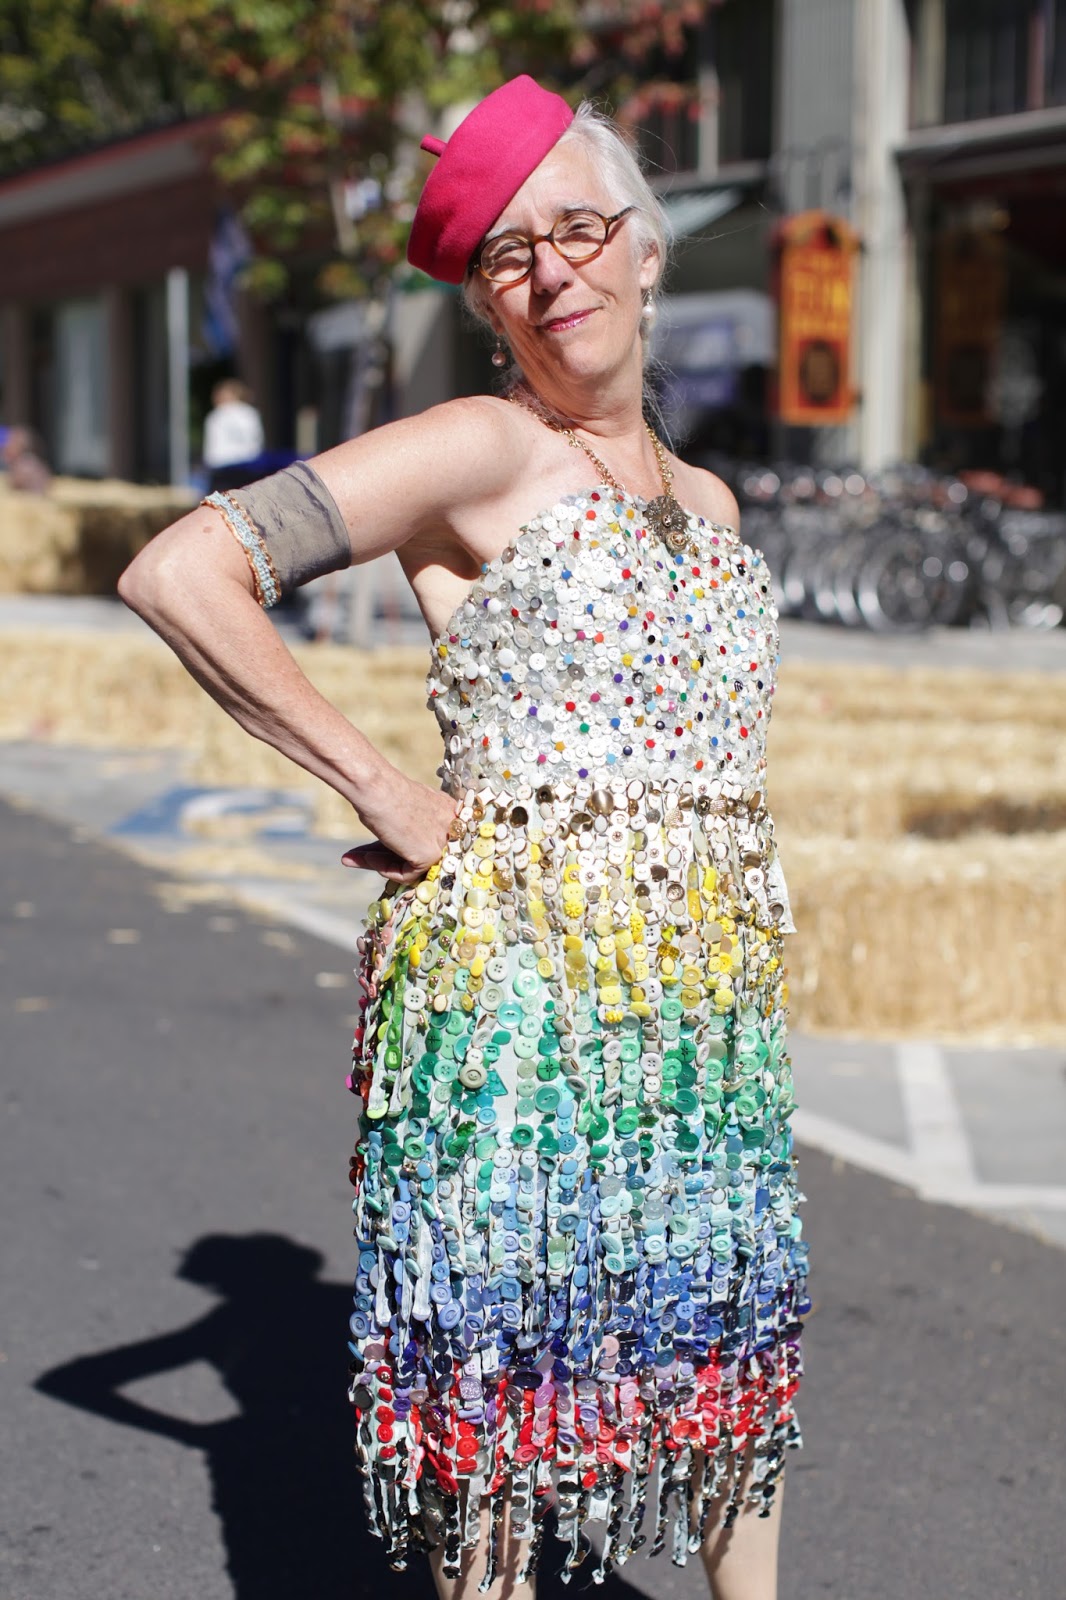 Director of the Port Townsend Film Festival, wore an incredible dress ...